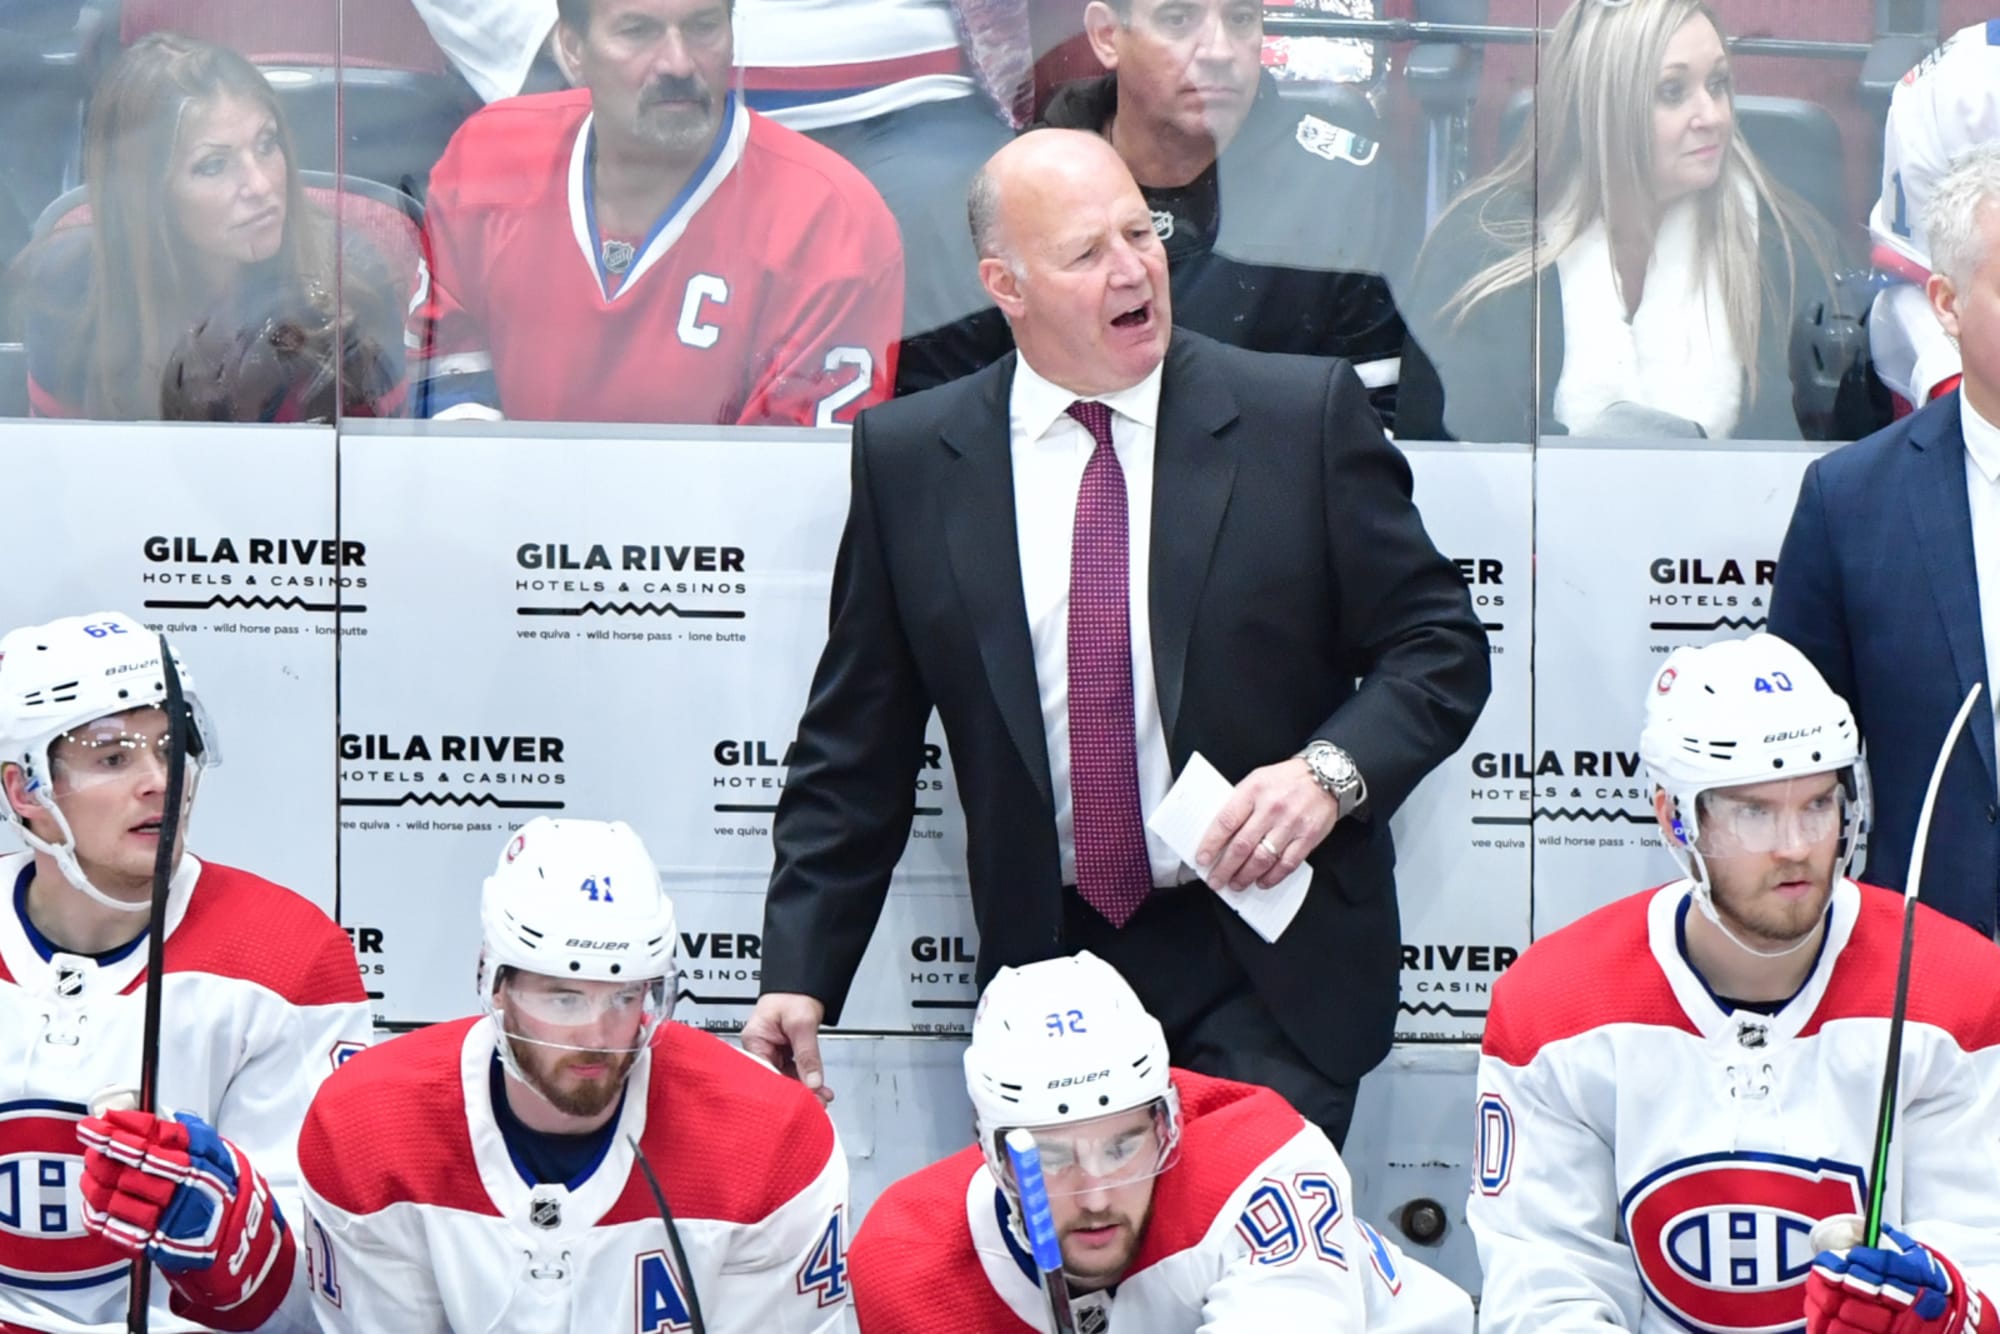 Claude Julien 'extremely fortunate' to be back behind the Canadiens bench  after health scare - The Globe and Mail